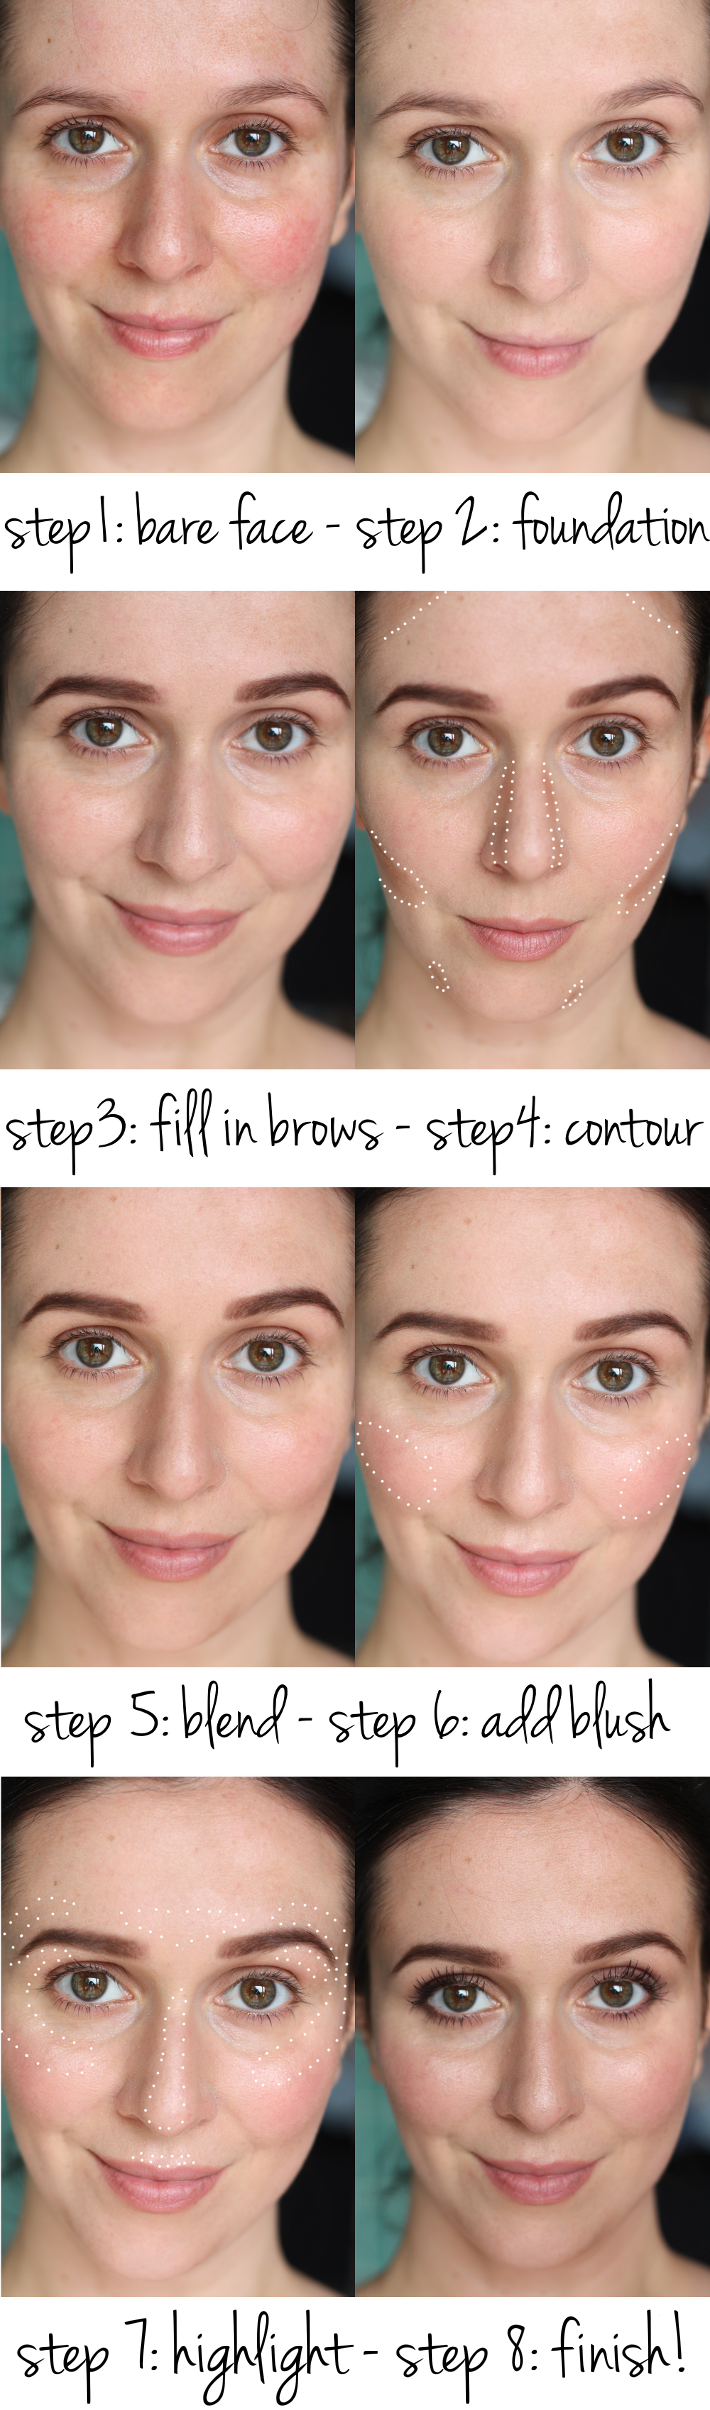 Review And Tutorial Contouring For Beginners With Sleek Face Form